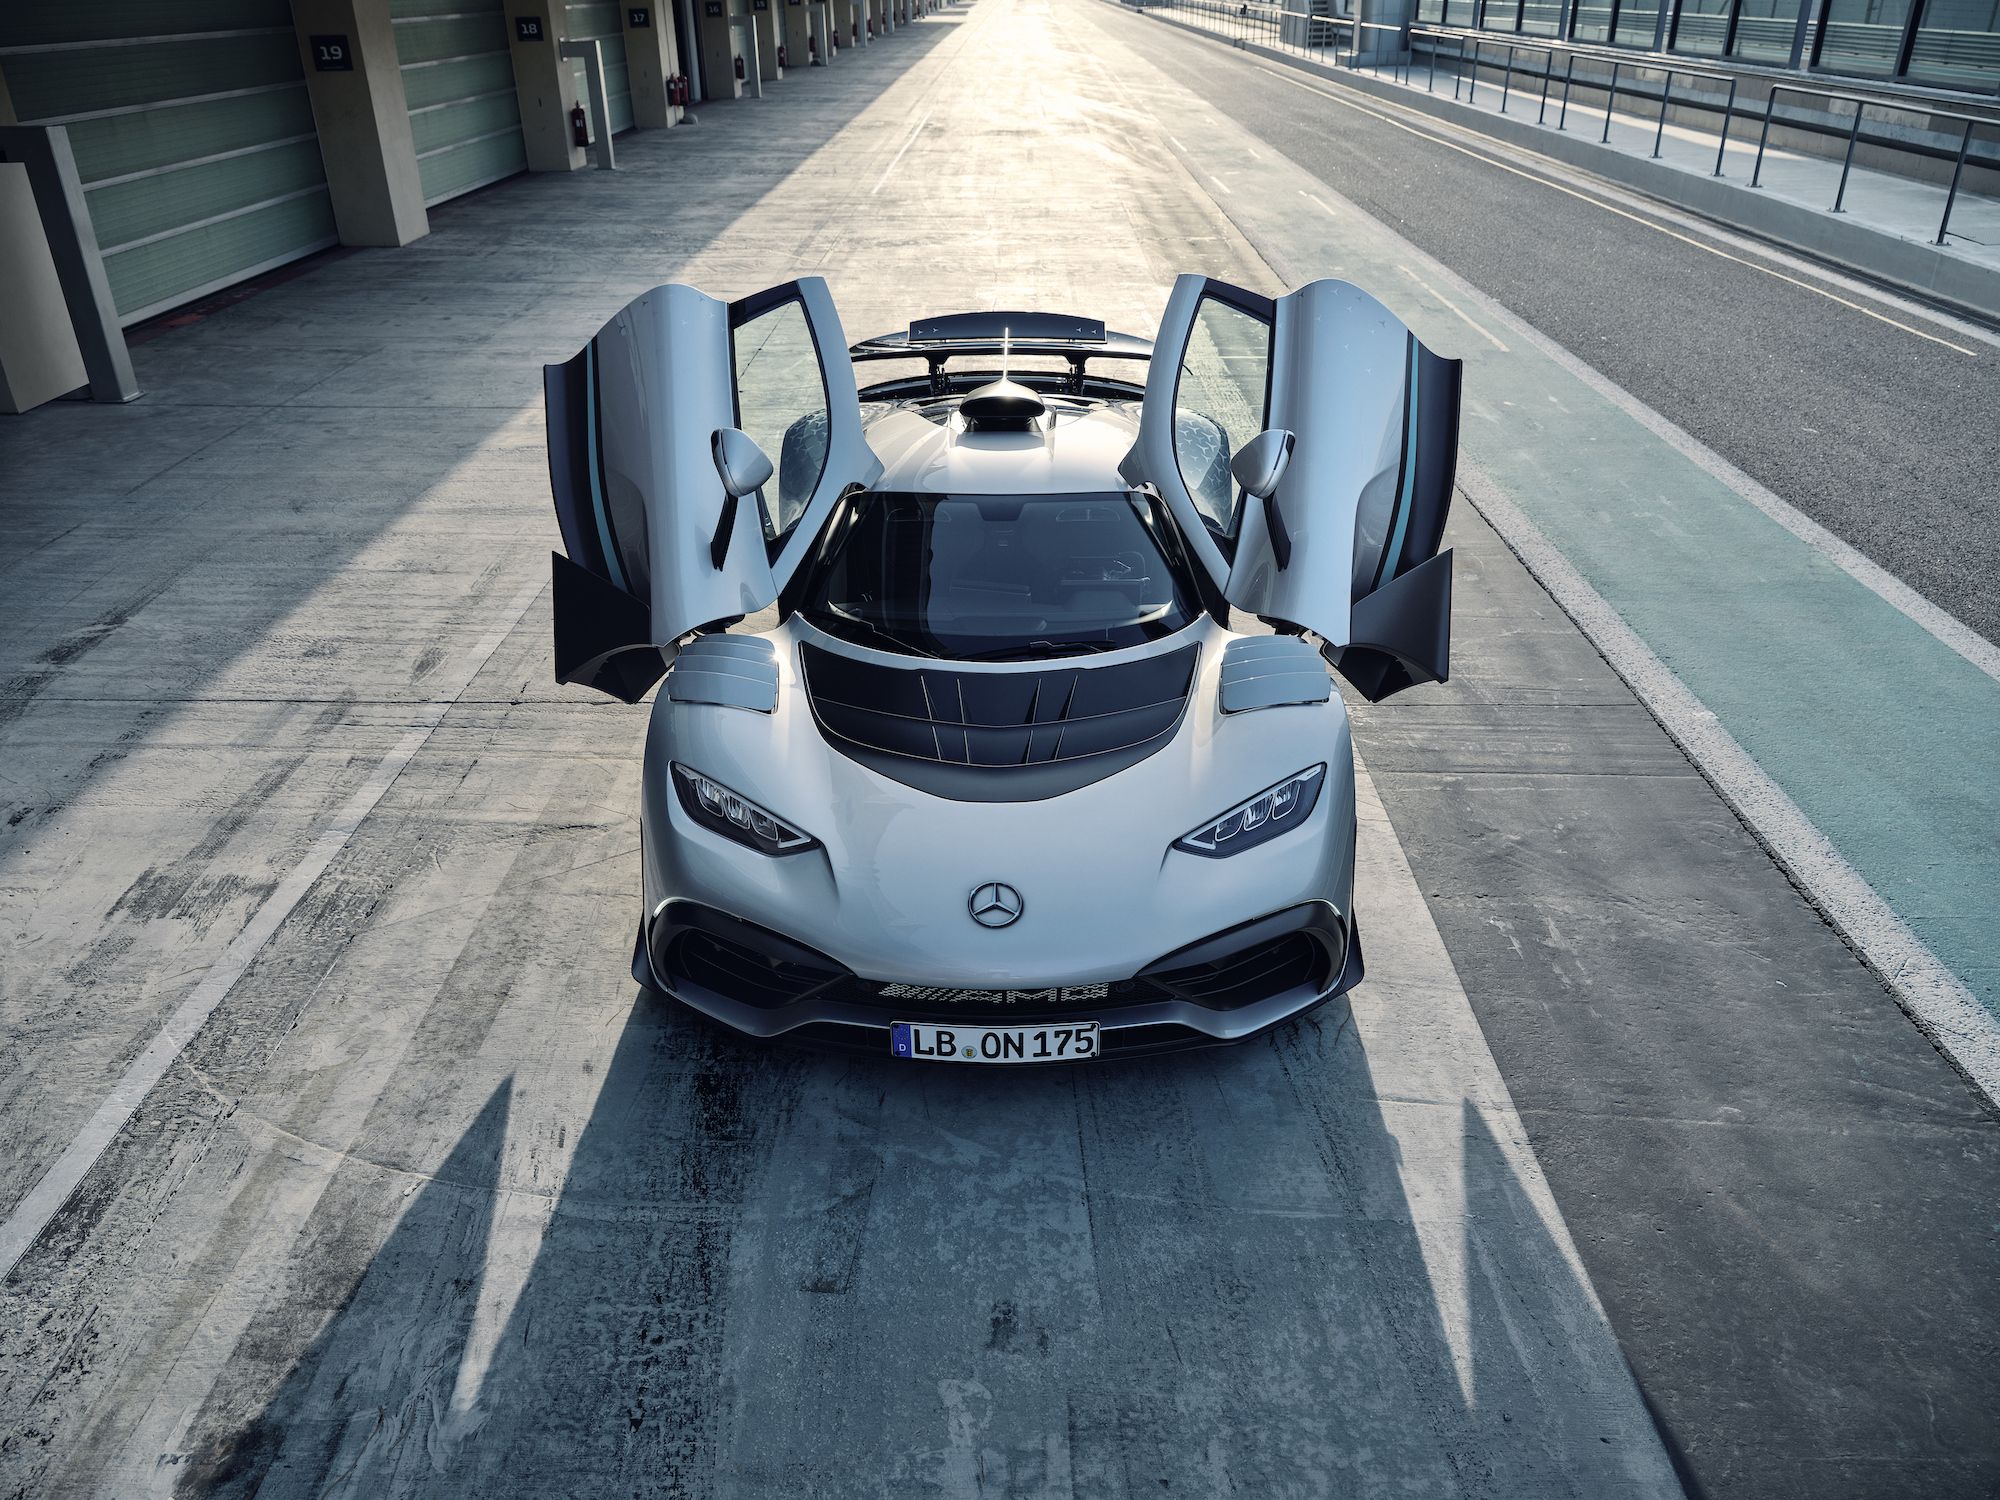 bao kanye west astonished the entire world by gifting justin bieber a mercedes amg project one supercar to celebrate the birth of his first son and express gratitude for their collaboration on the upcoming music video 65415c0521a0e Kanye West Astonished The Entire World By Gifting Justin Bieber A Mercedes-amg Project One Supercar To Celebrate The Birth Of His First Son And Express Gratitude For Their Collaboration On The Upcoming Music Video.